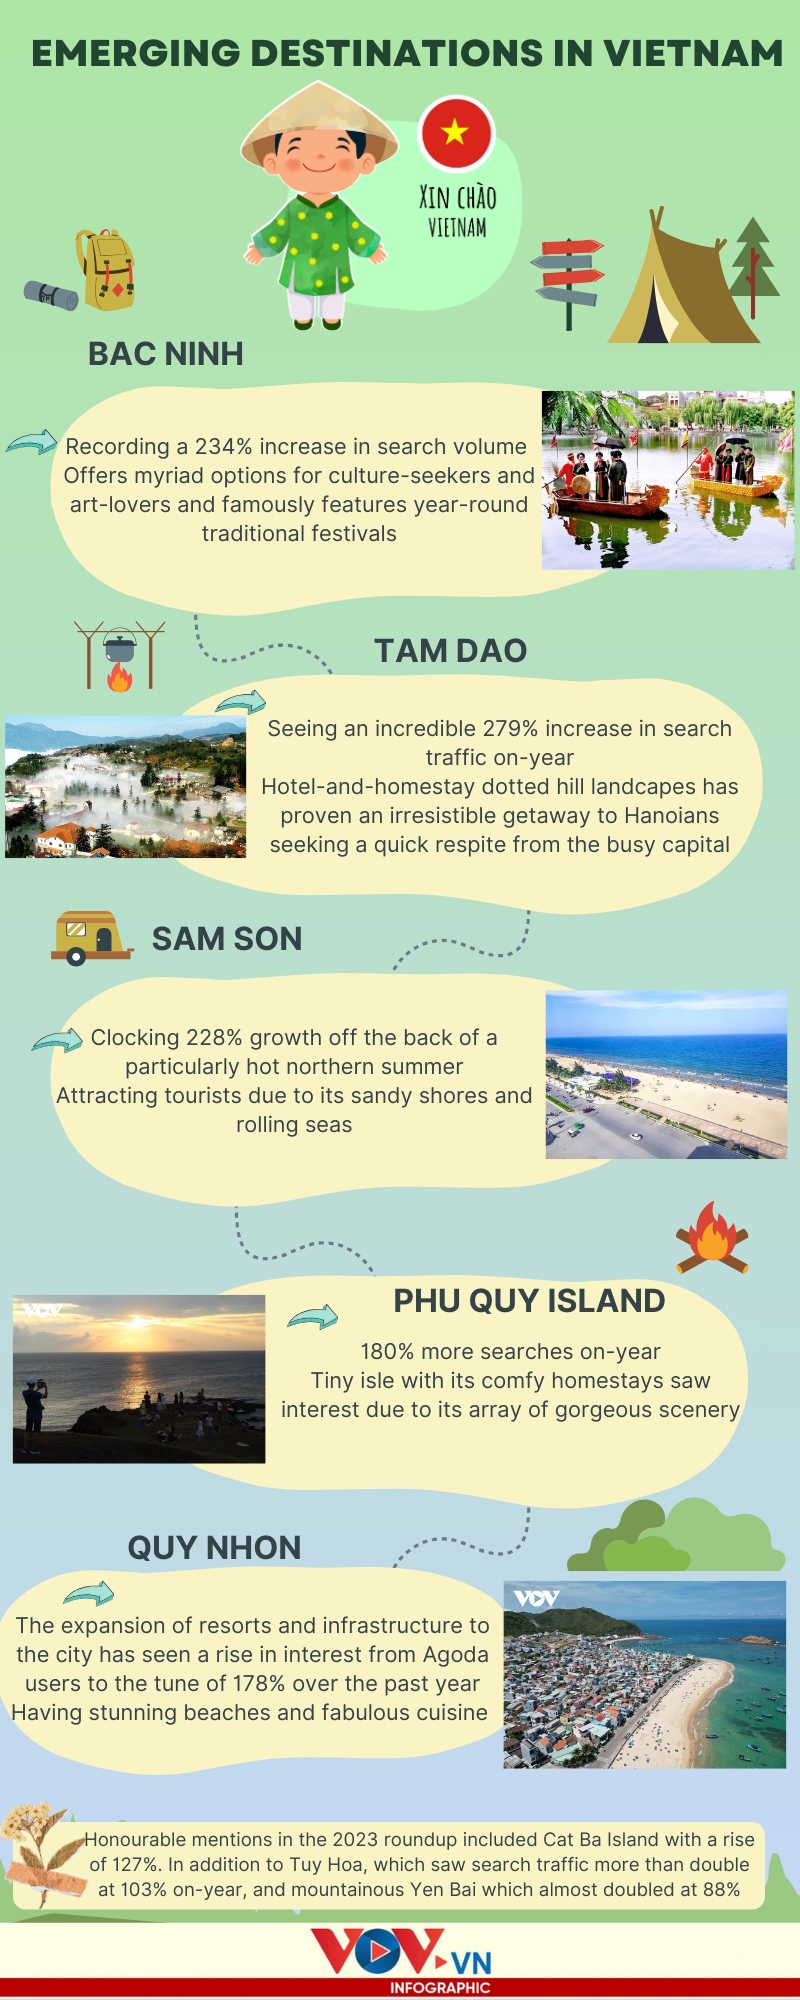 a glance at emerging destinations in vietnam picture 1